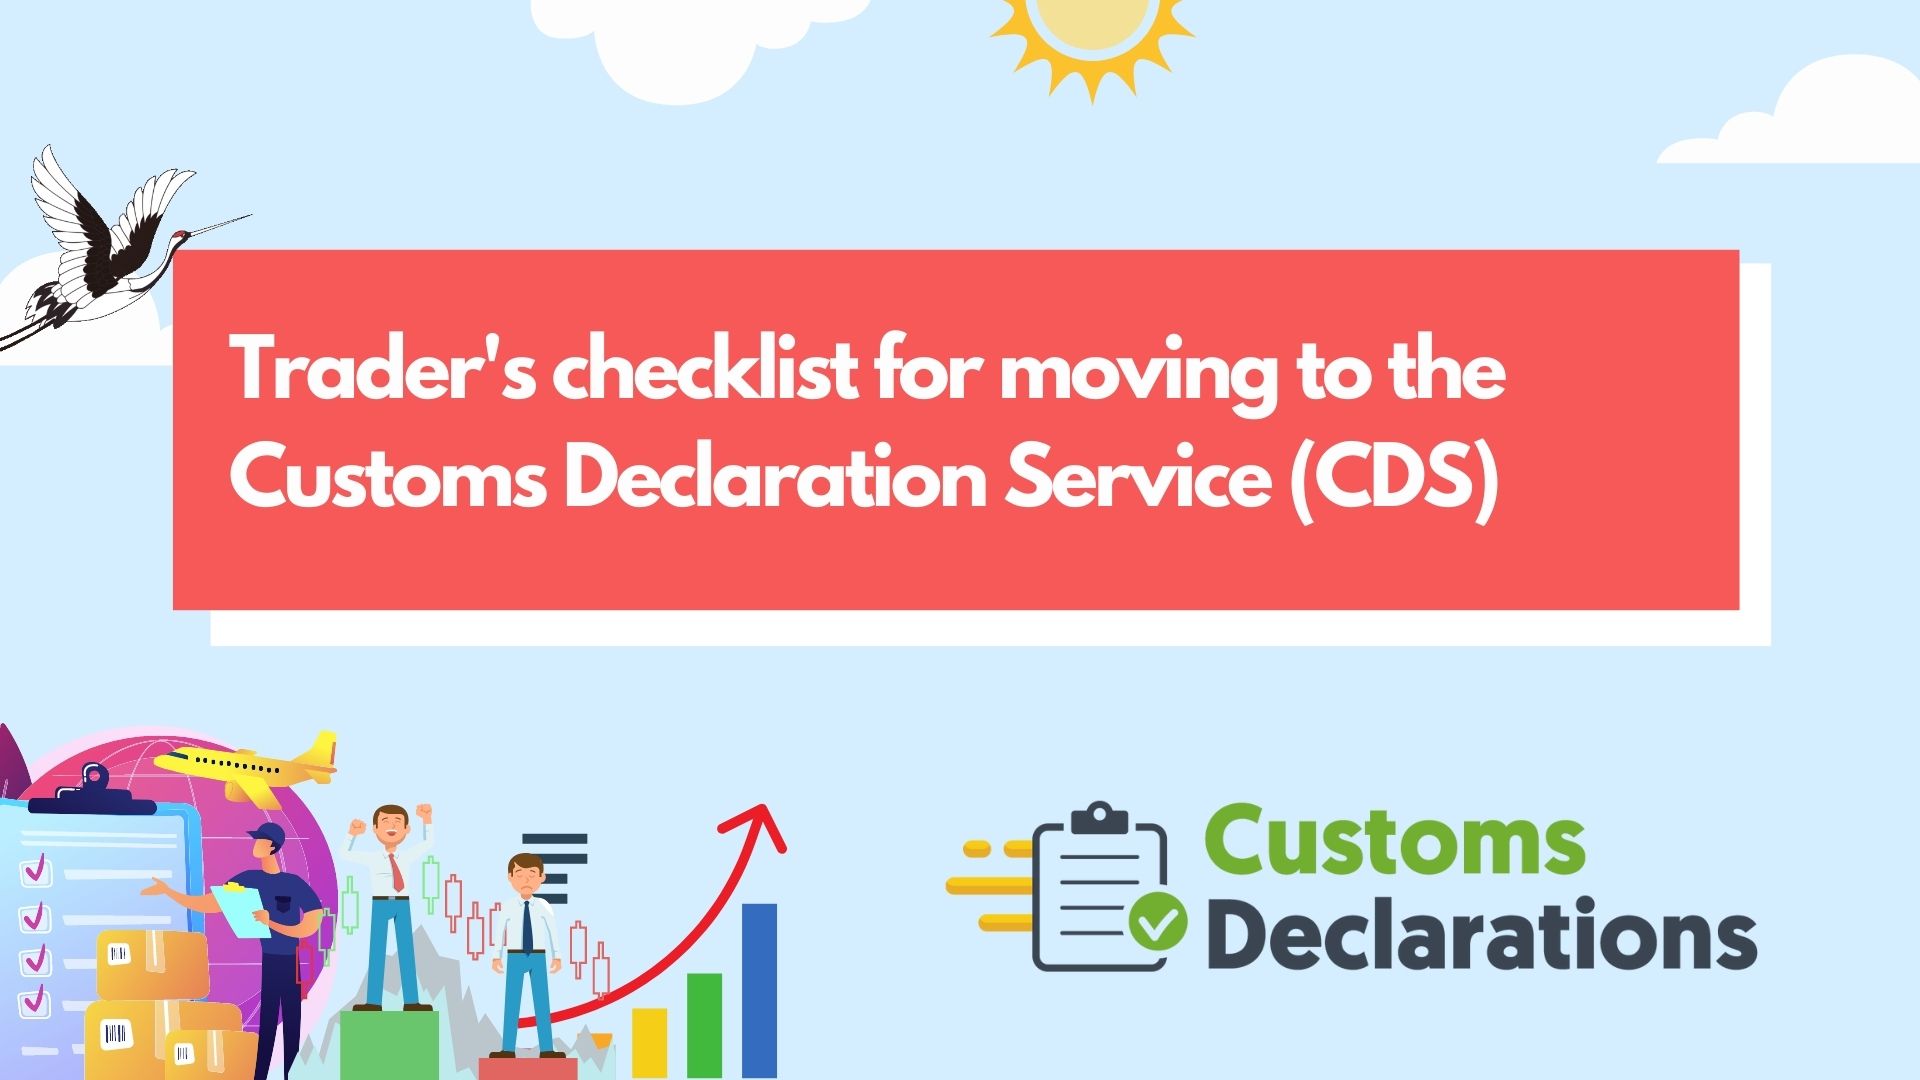 Trader’s checklist for moving to the Customs Declaration Service (CDS)